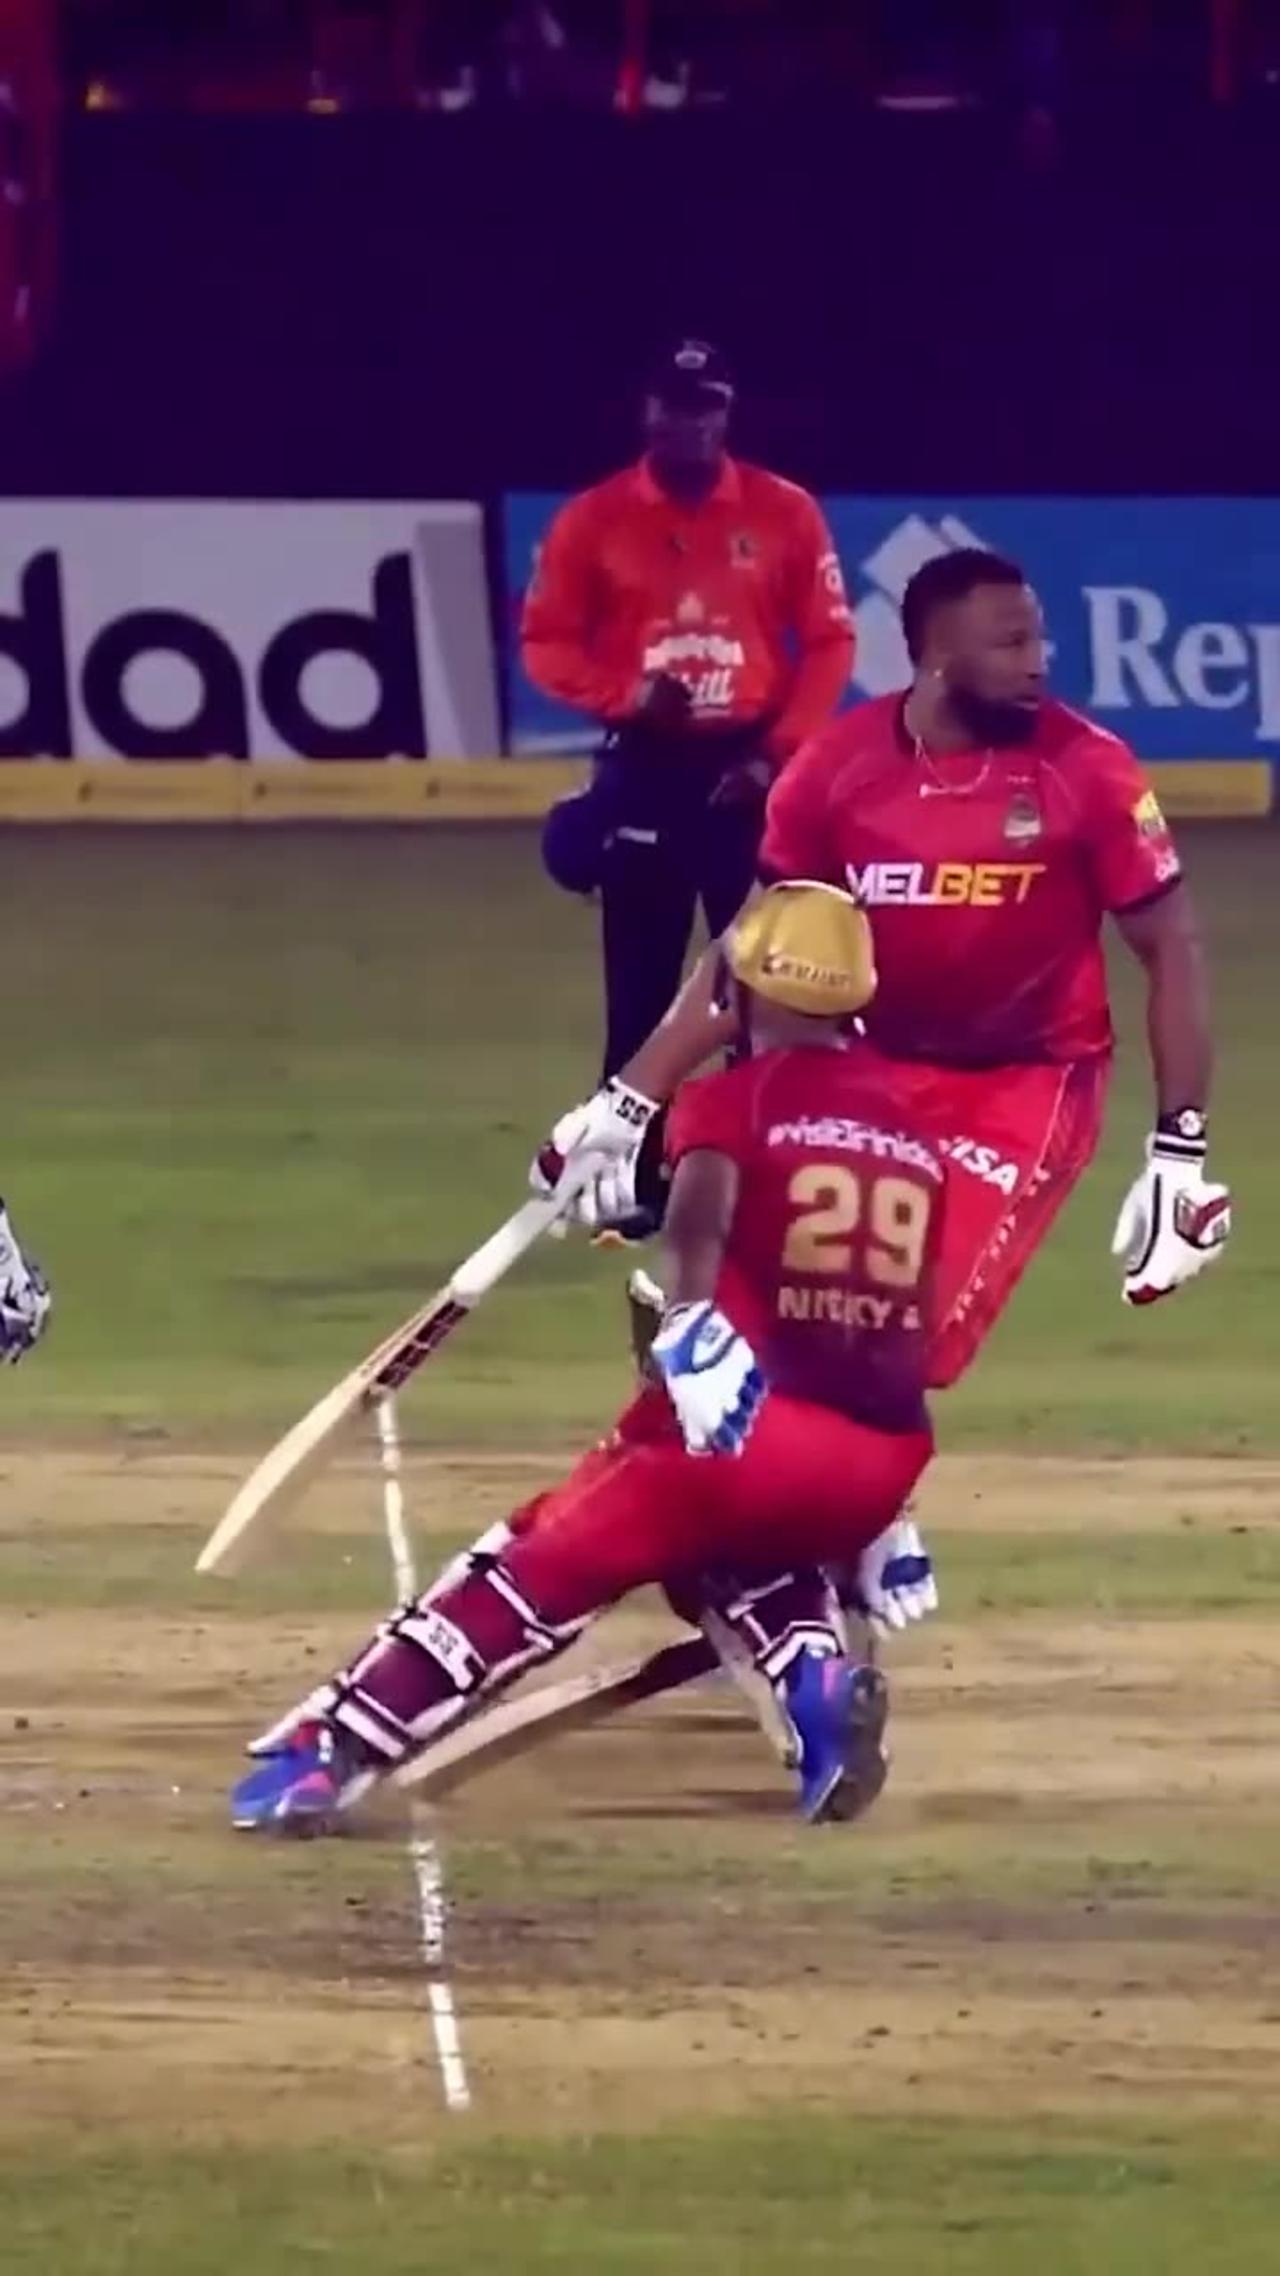 Pollard And Pooran's HORROR Run Out Cricket Highlights Matches Short Video Cricket Lovers